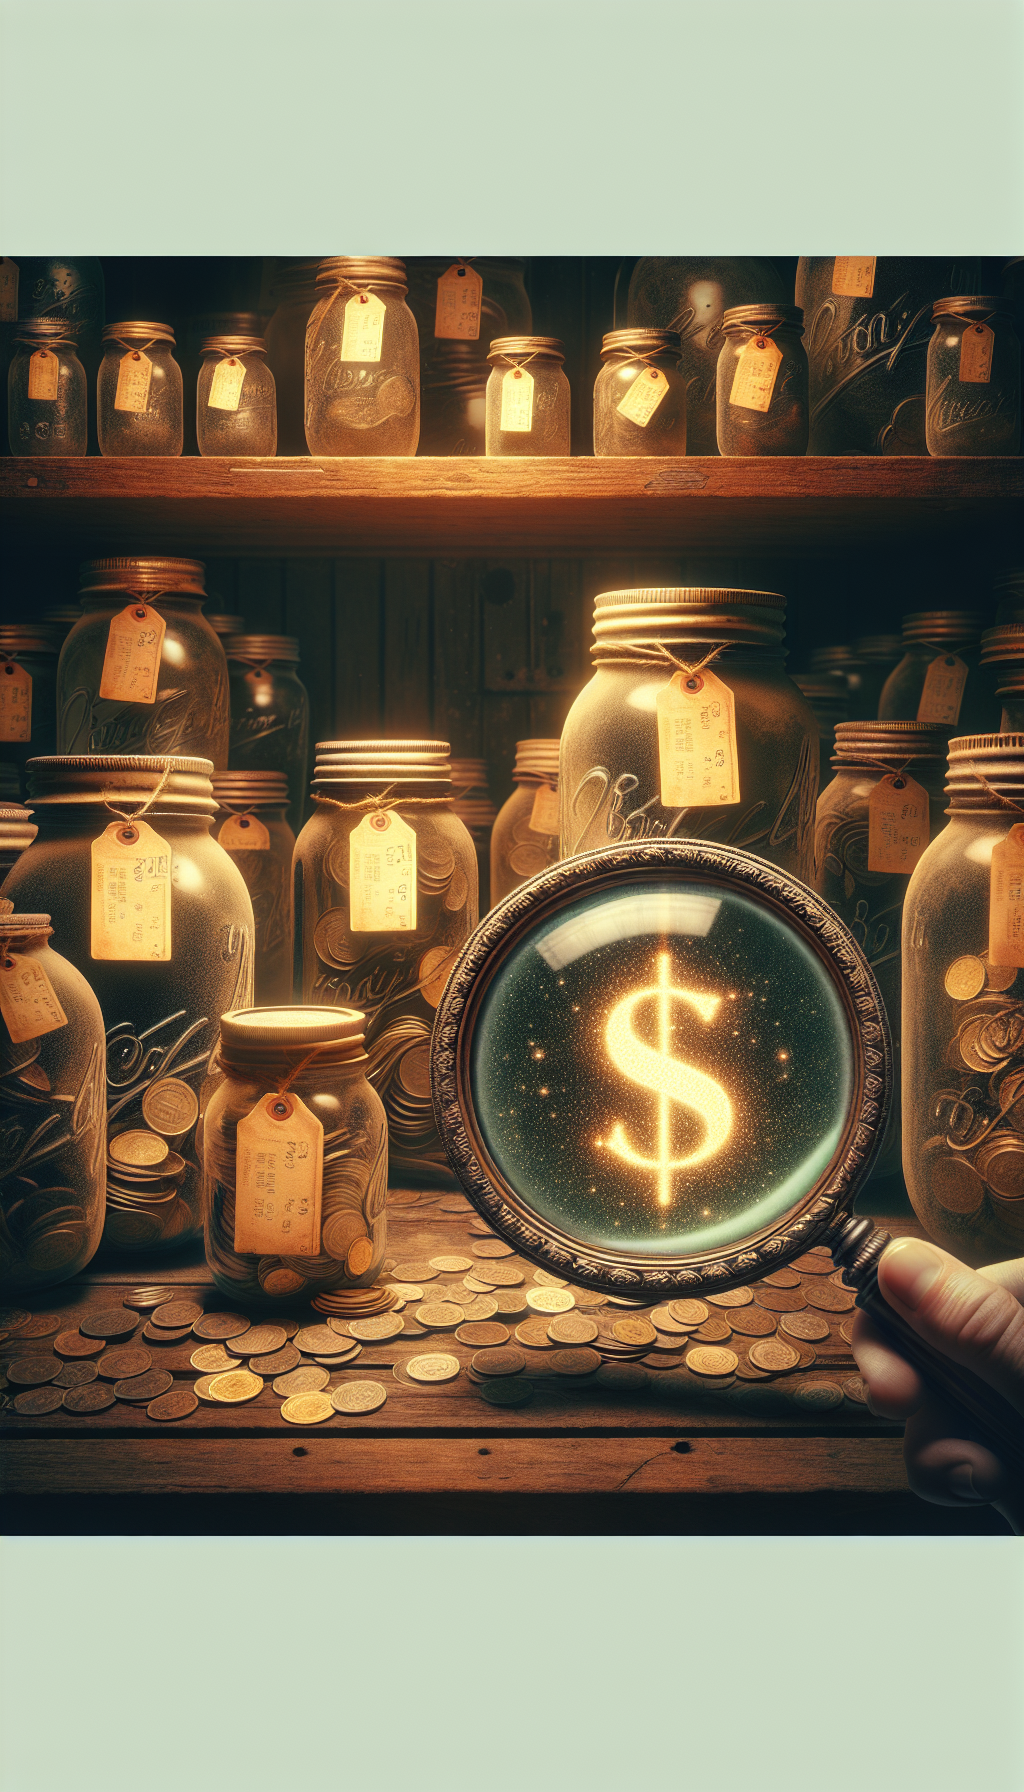 An illustration depicts a dusty pantry shelf lined with various old mason jars, each with a vintage price tag, glowing subtly to highlight their hidden worth. In the foreground, a classic magnifying glass hovers over a particularly rare jar, reflecting the gleam of dollar signs, playfully juxtaposing the transition from obscurity to monetary significance.